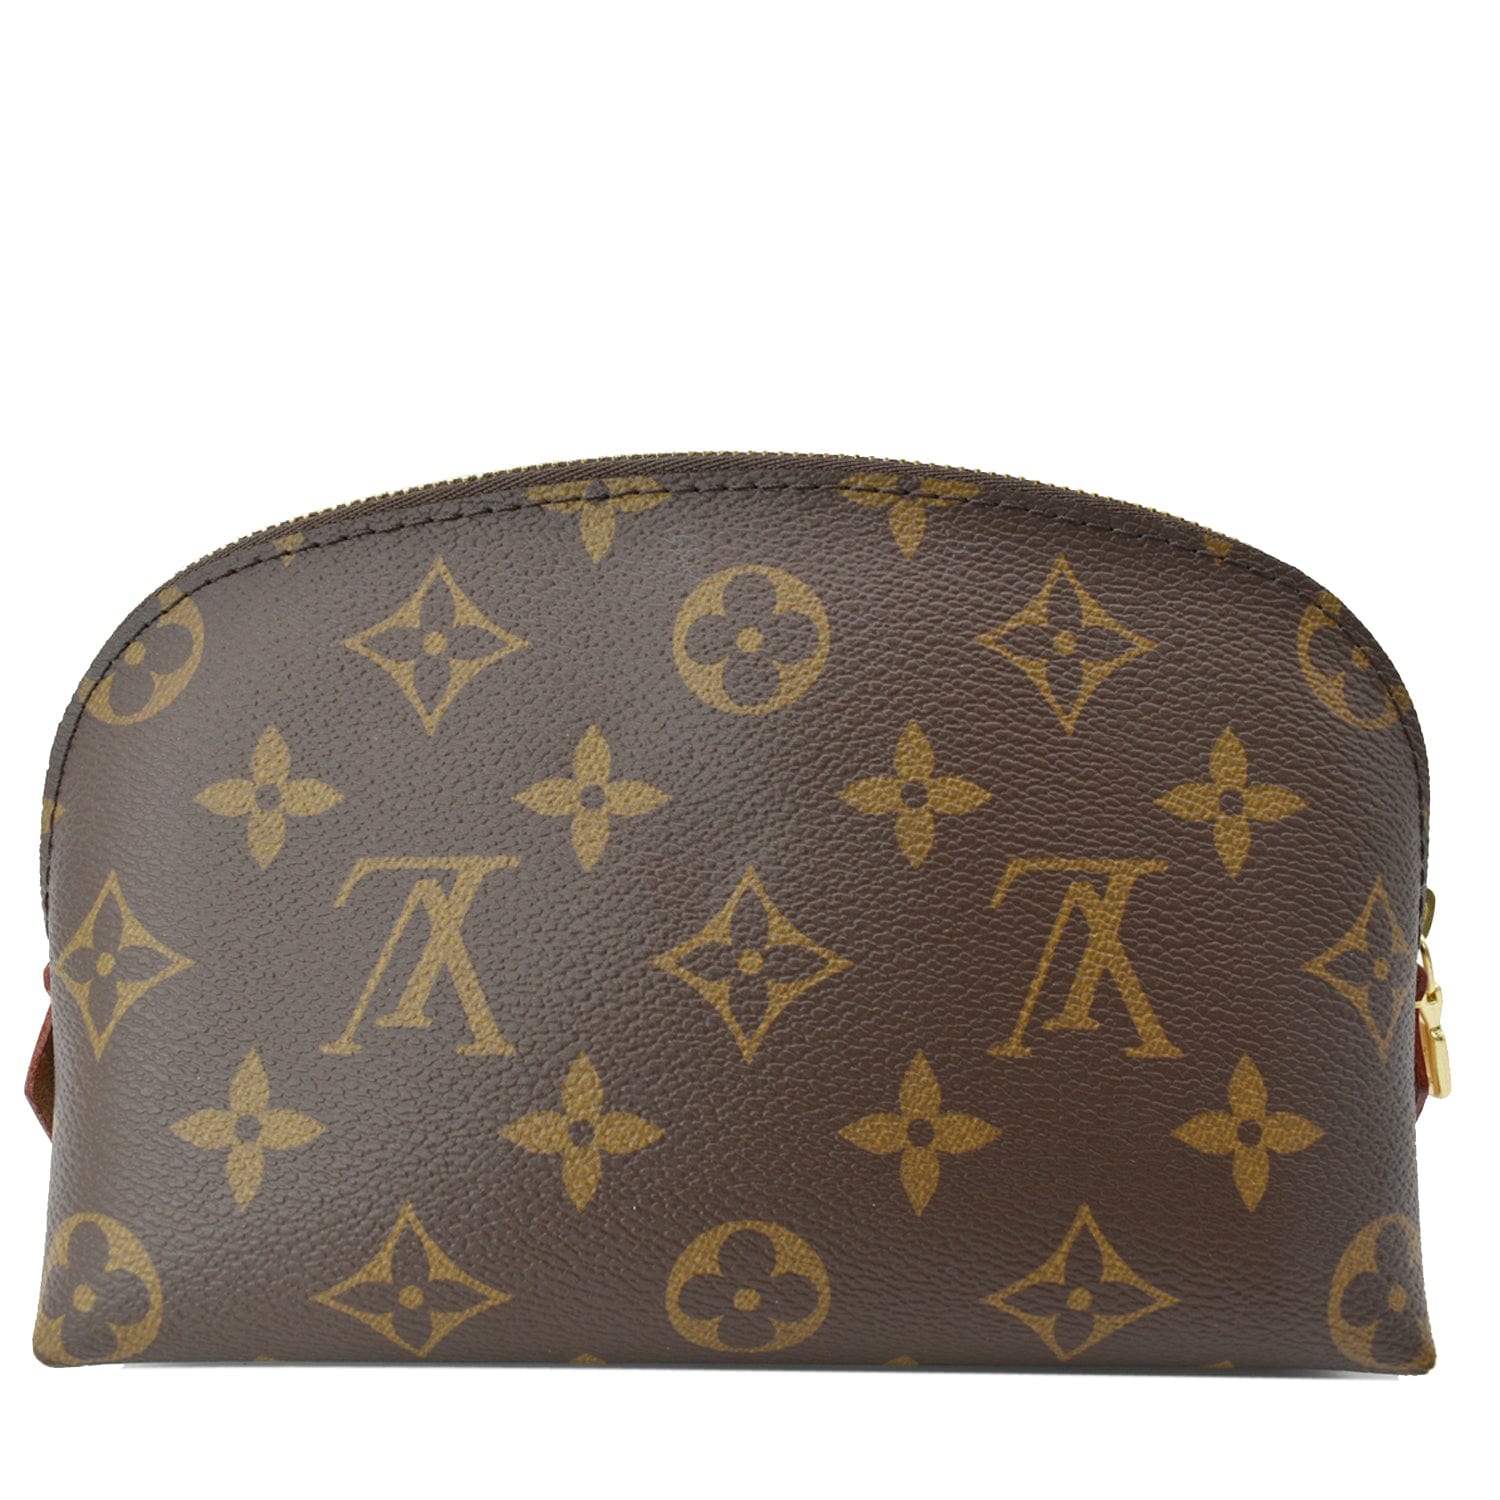 Products by Louis Vuitton: Cosmetic Pouch